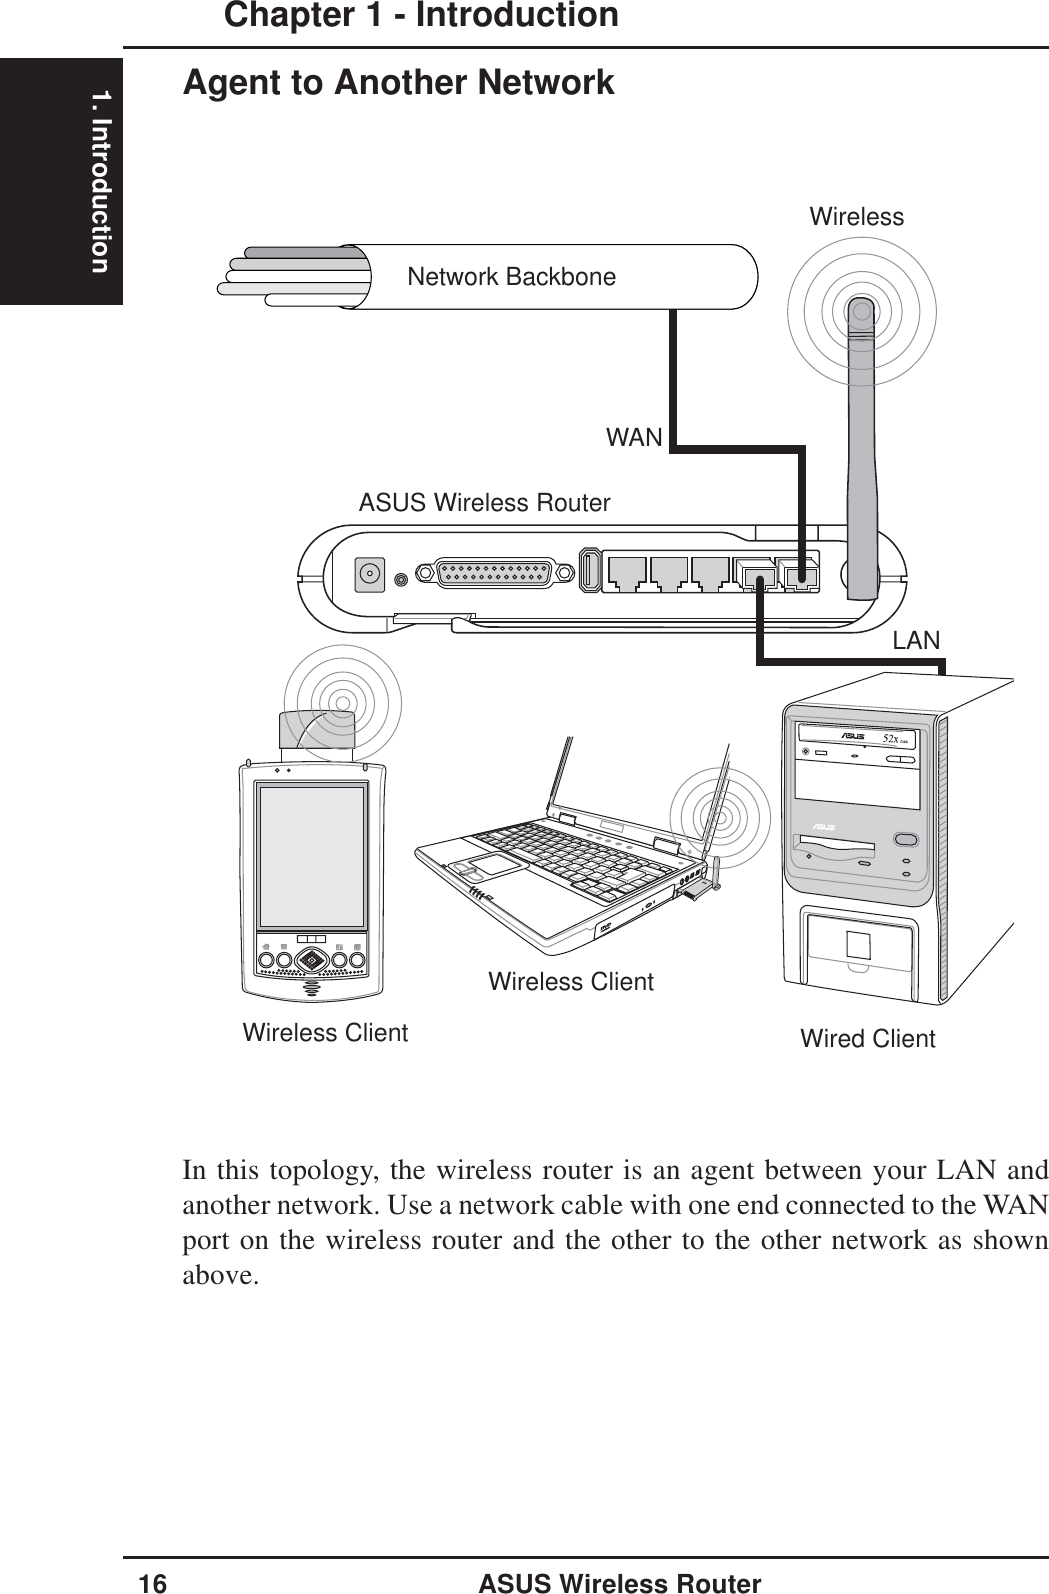 1. IntroductionChapter 1 - Introduction16 ASUS Wireless RouterWired ClientWireless ClientWireless ClientASUS Wireless RouterWANLANWirelessNetwork BackboneAgent to Another NetworkIn this topology, the wireless router is an agent between your LAN andanother network. Use a network cable with one end connected to the WANport on the wireless router and the other to the other network as shownabove.